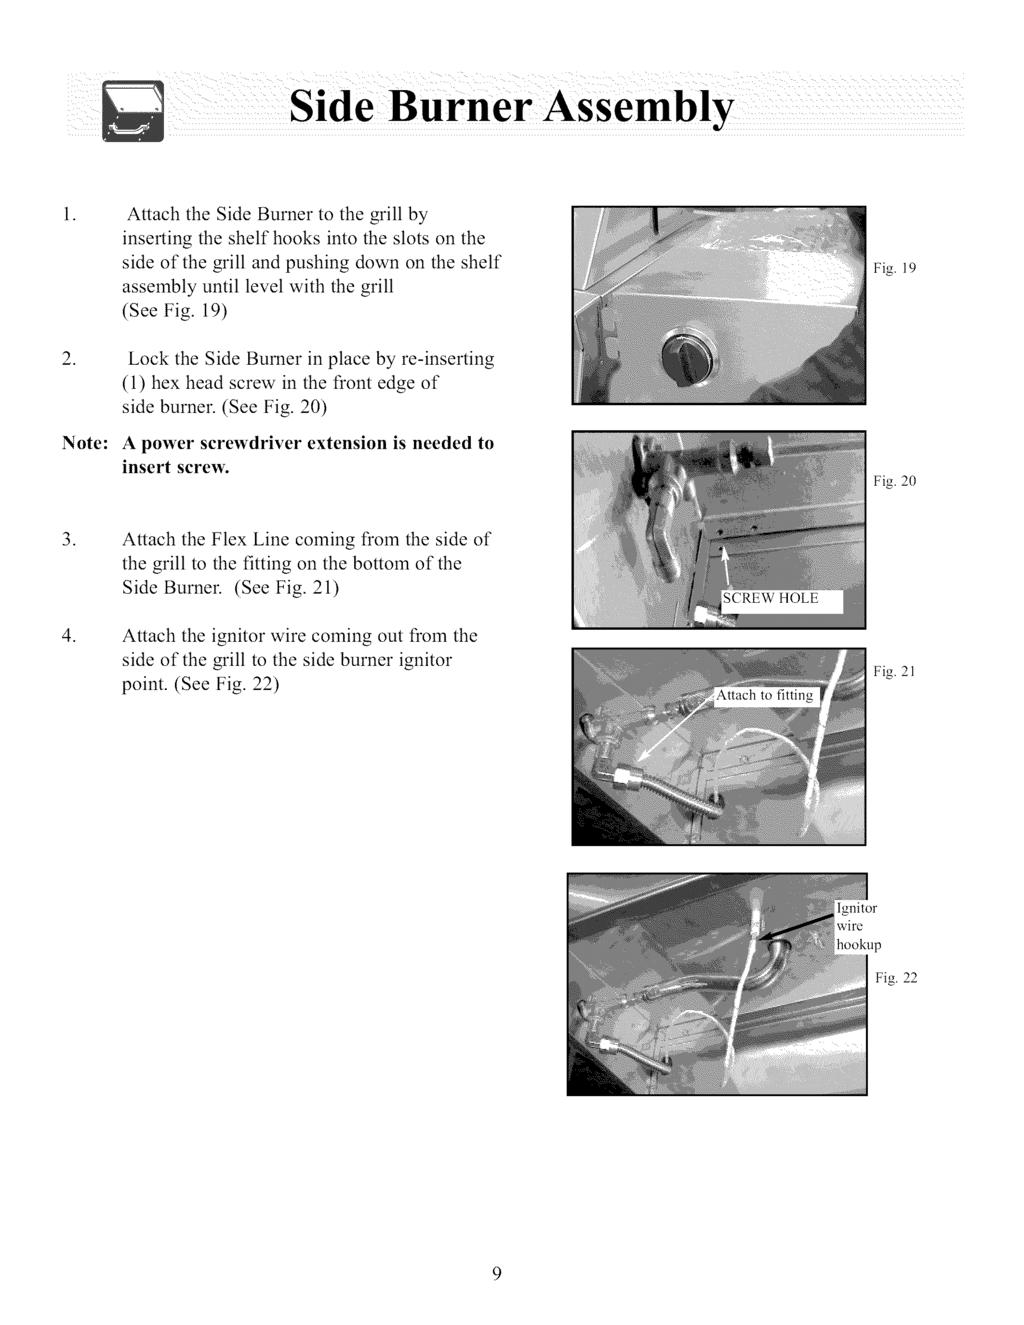 Attach the Side Burner to the grill by inserting the shelf hooks into the slots on the side of the grill and pushing down on the shelf assembly until level with the grill (See Fig 19) Fig 19 Lock the